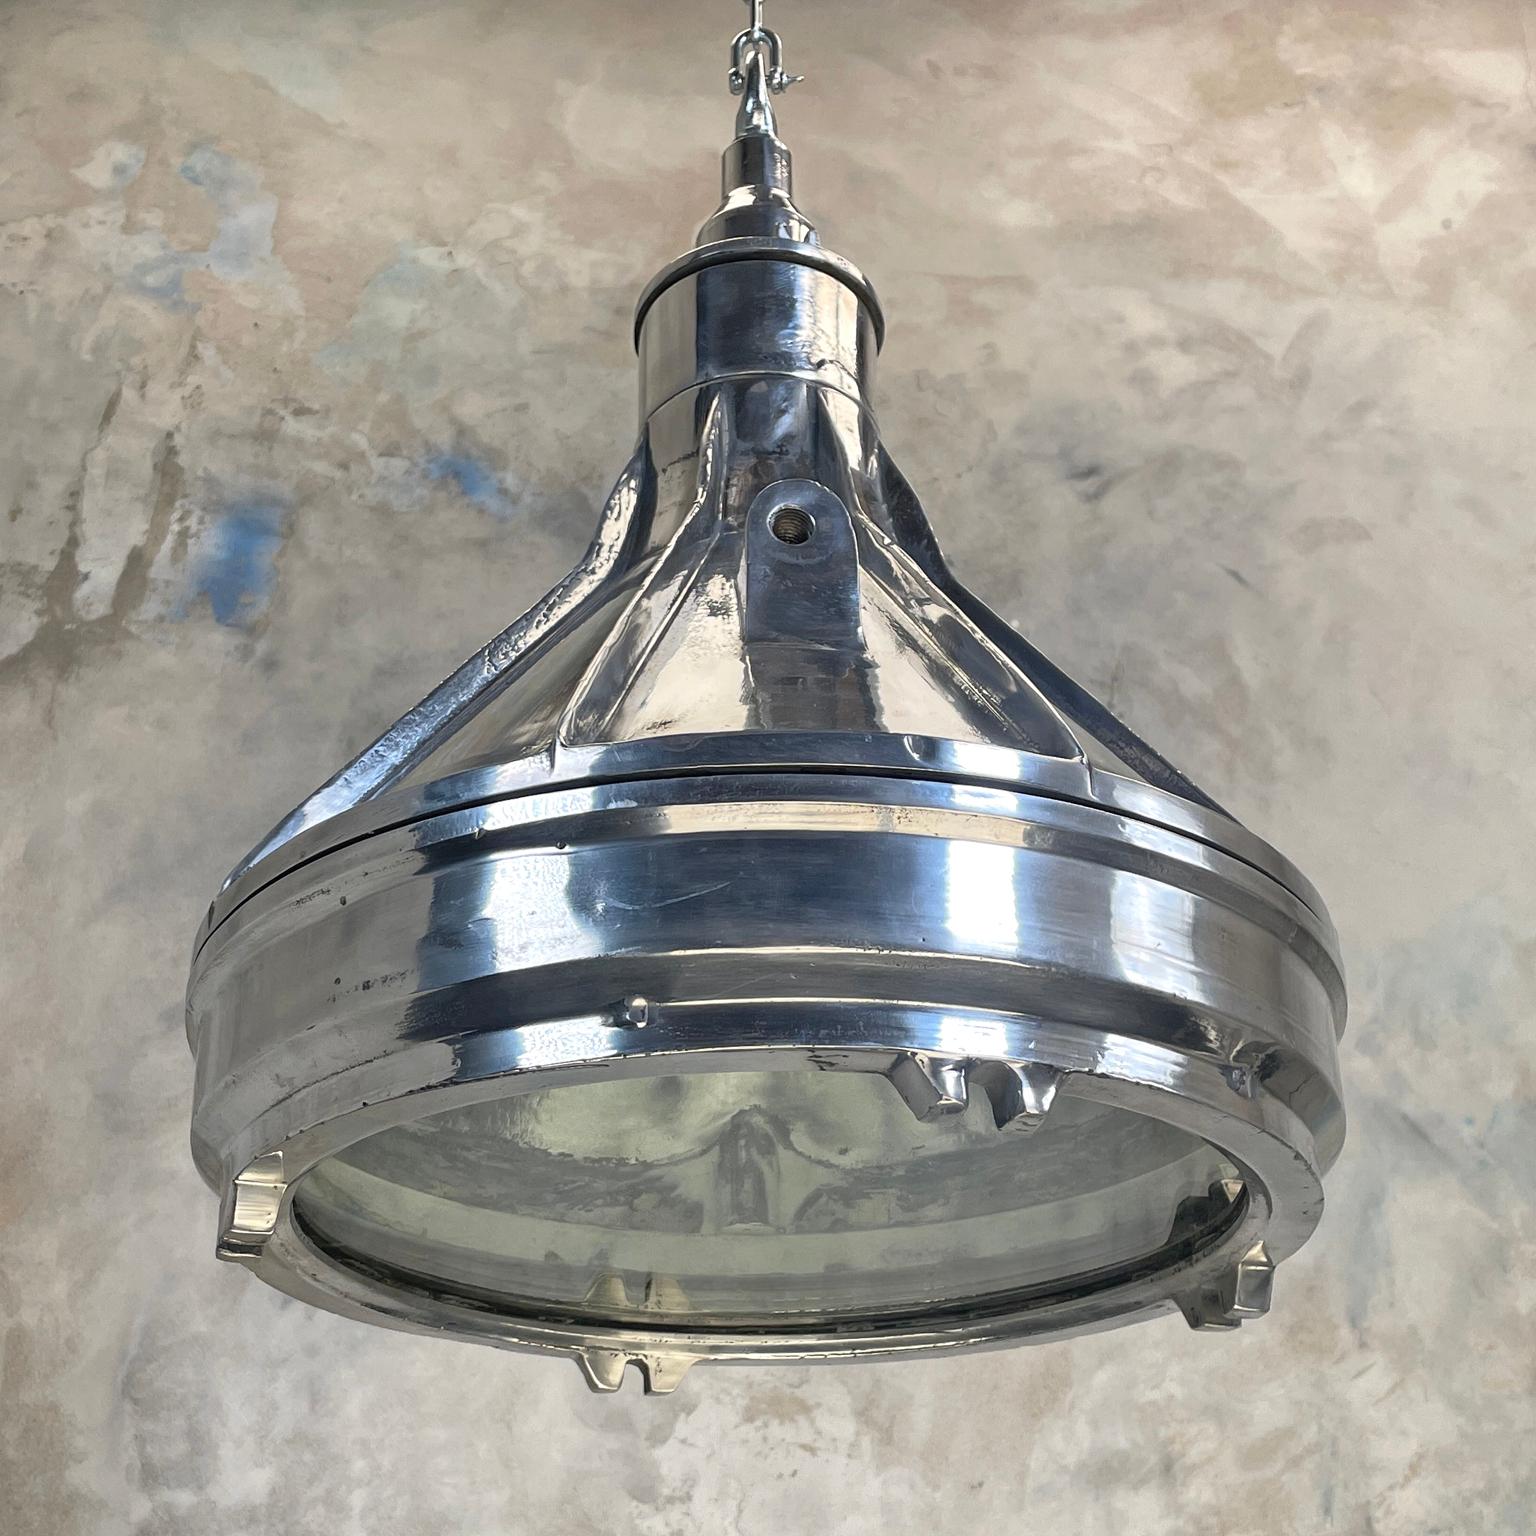 Large vintage industrial explosion proof aluminium ceiling pendant lighting, reclaimed from supertankers and cart ships.

Original and authentic metal light fixtures perfect for creating contemporary industrial style interiors. Stunning kitchen